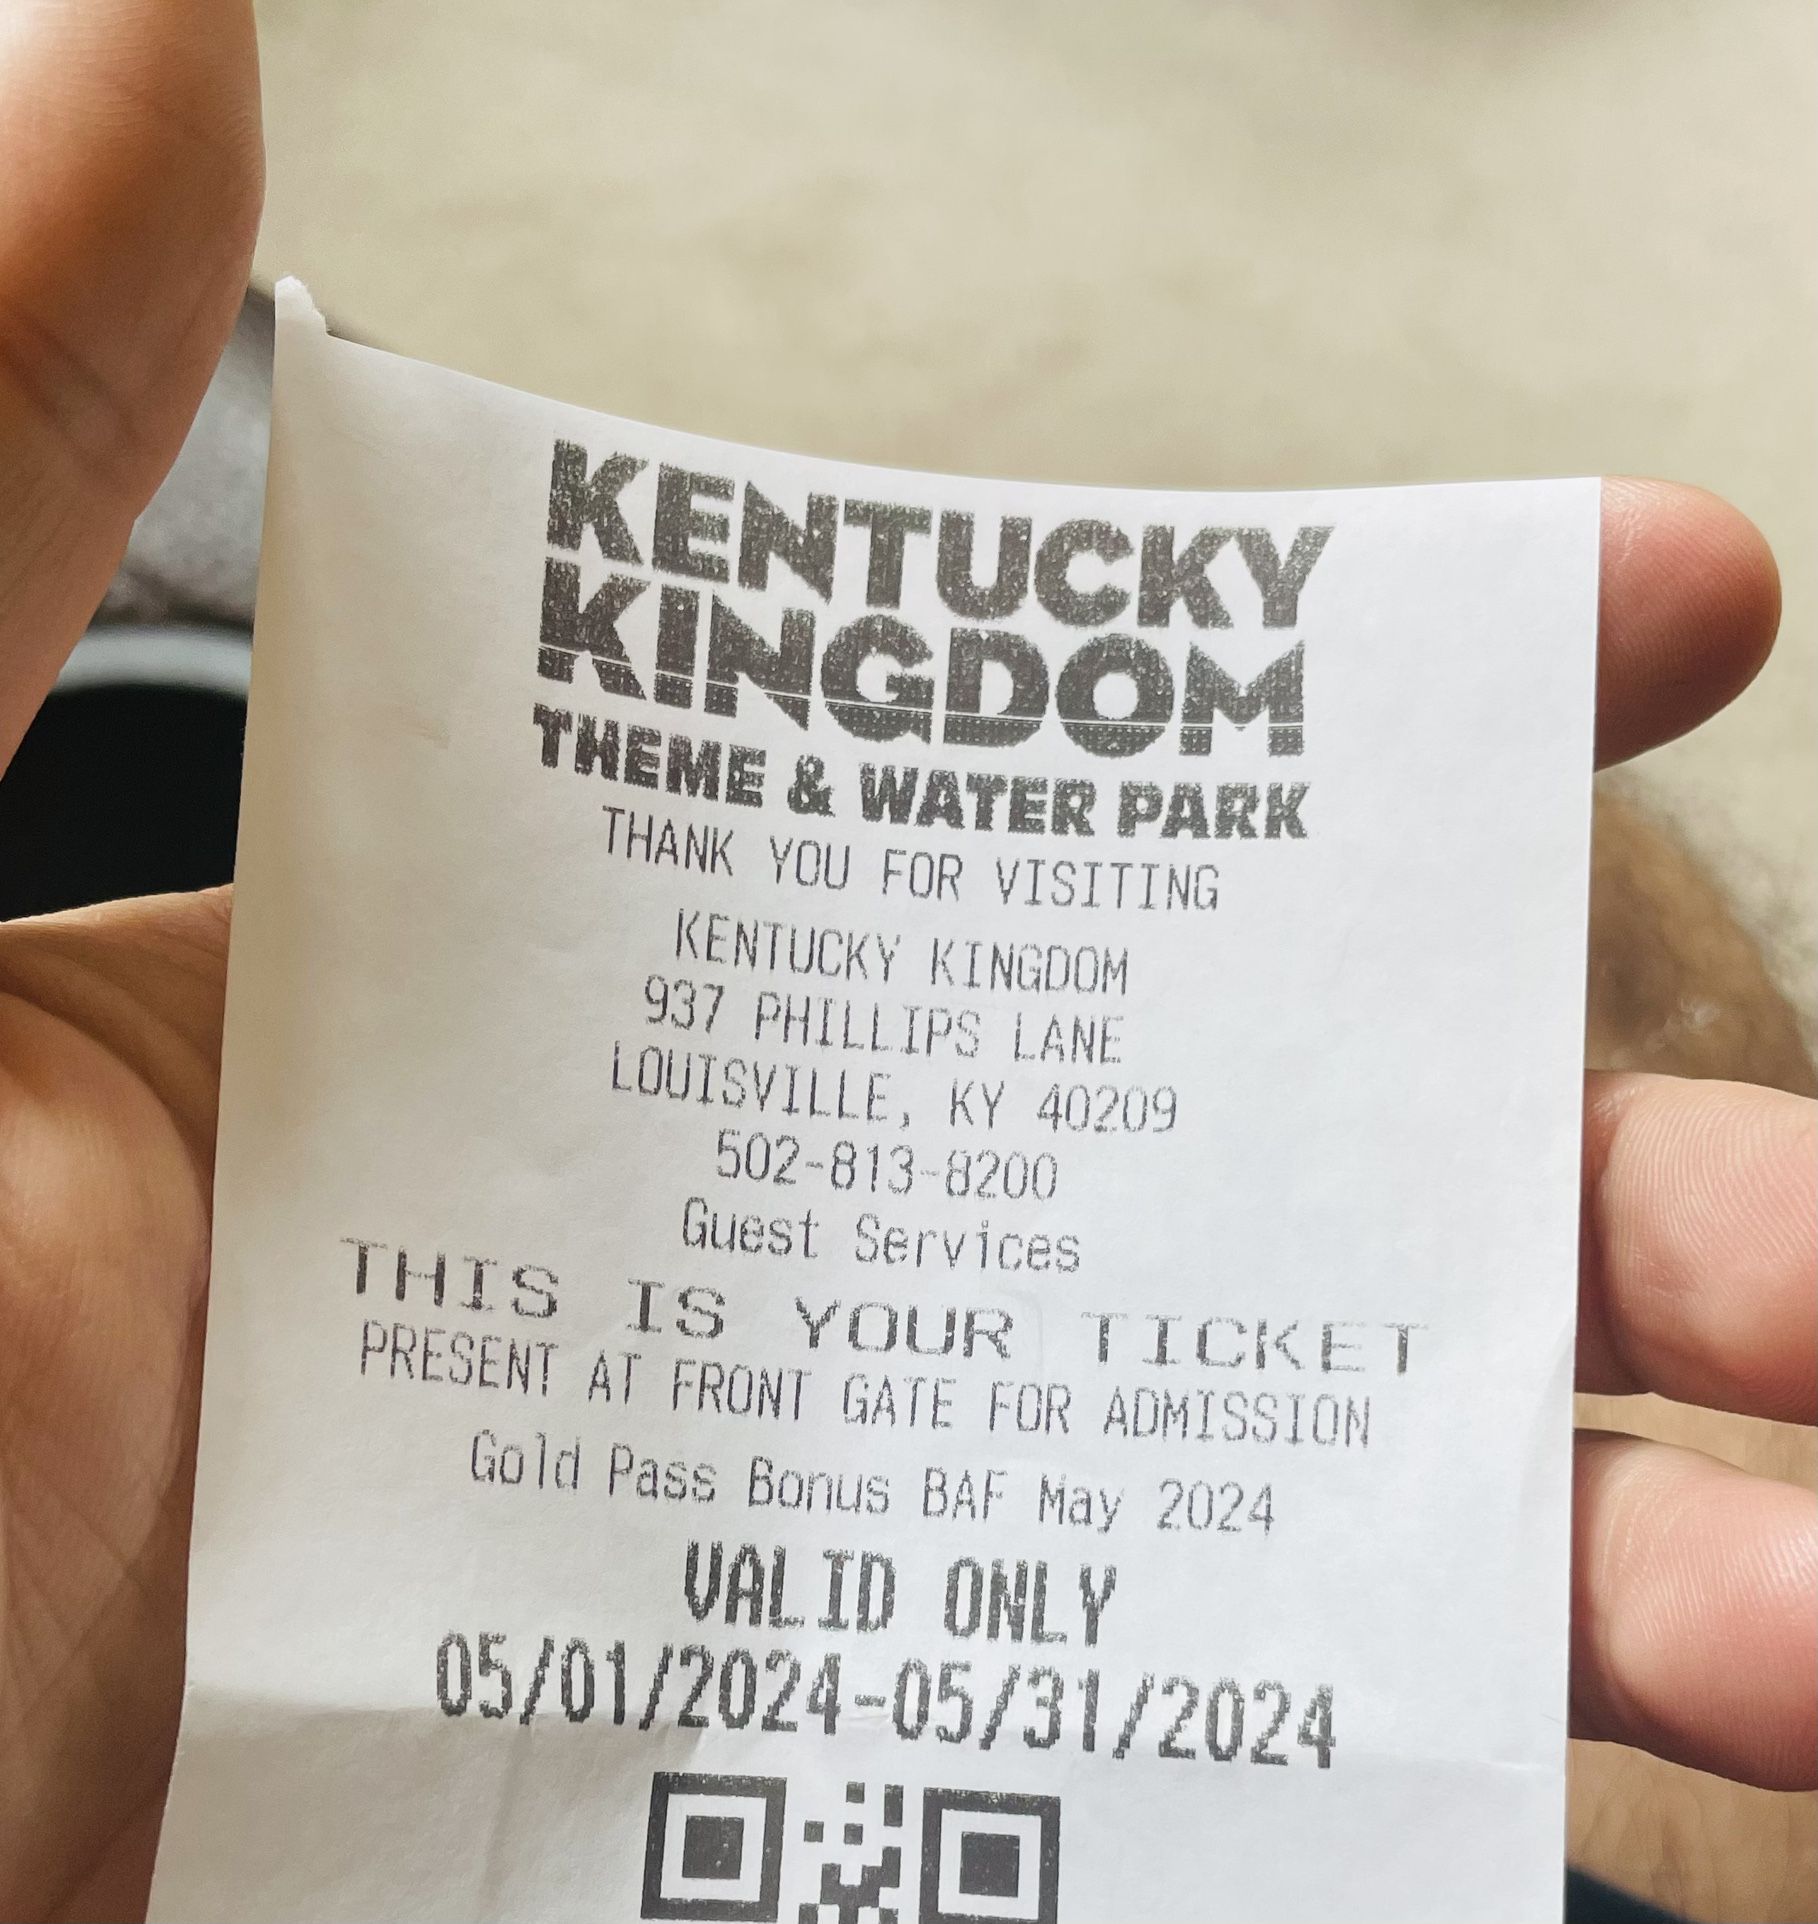 4 Tickets For Kentucky Kingdom Theme And Water Park .All For $40 Valid Until May 31 